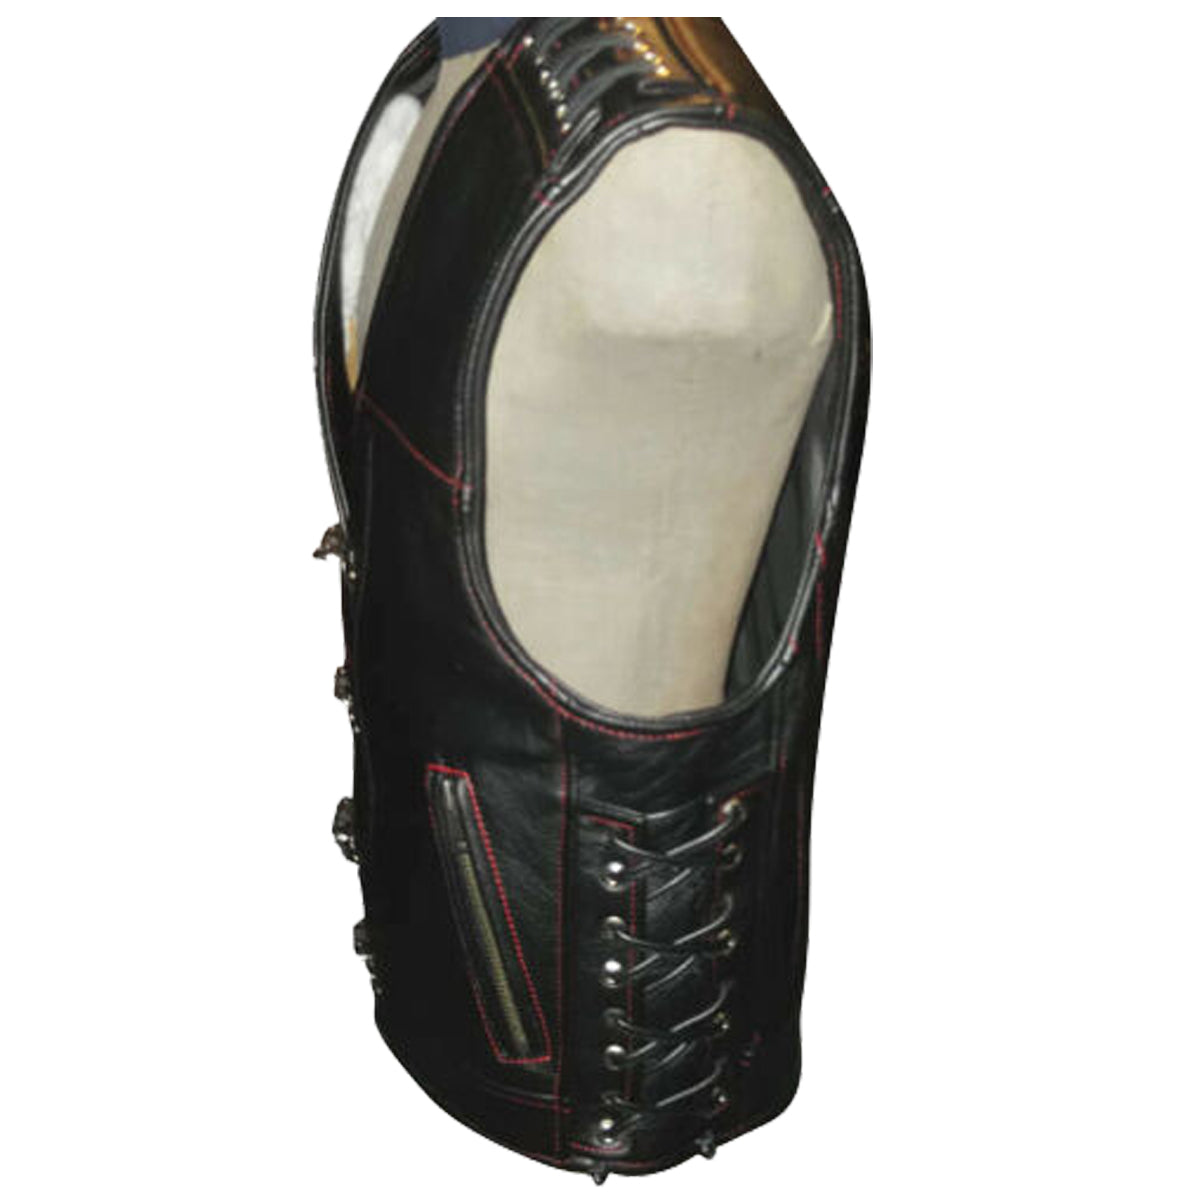 Men Motorcycle Leather Vest For Sale Red Thread